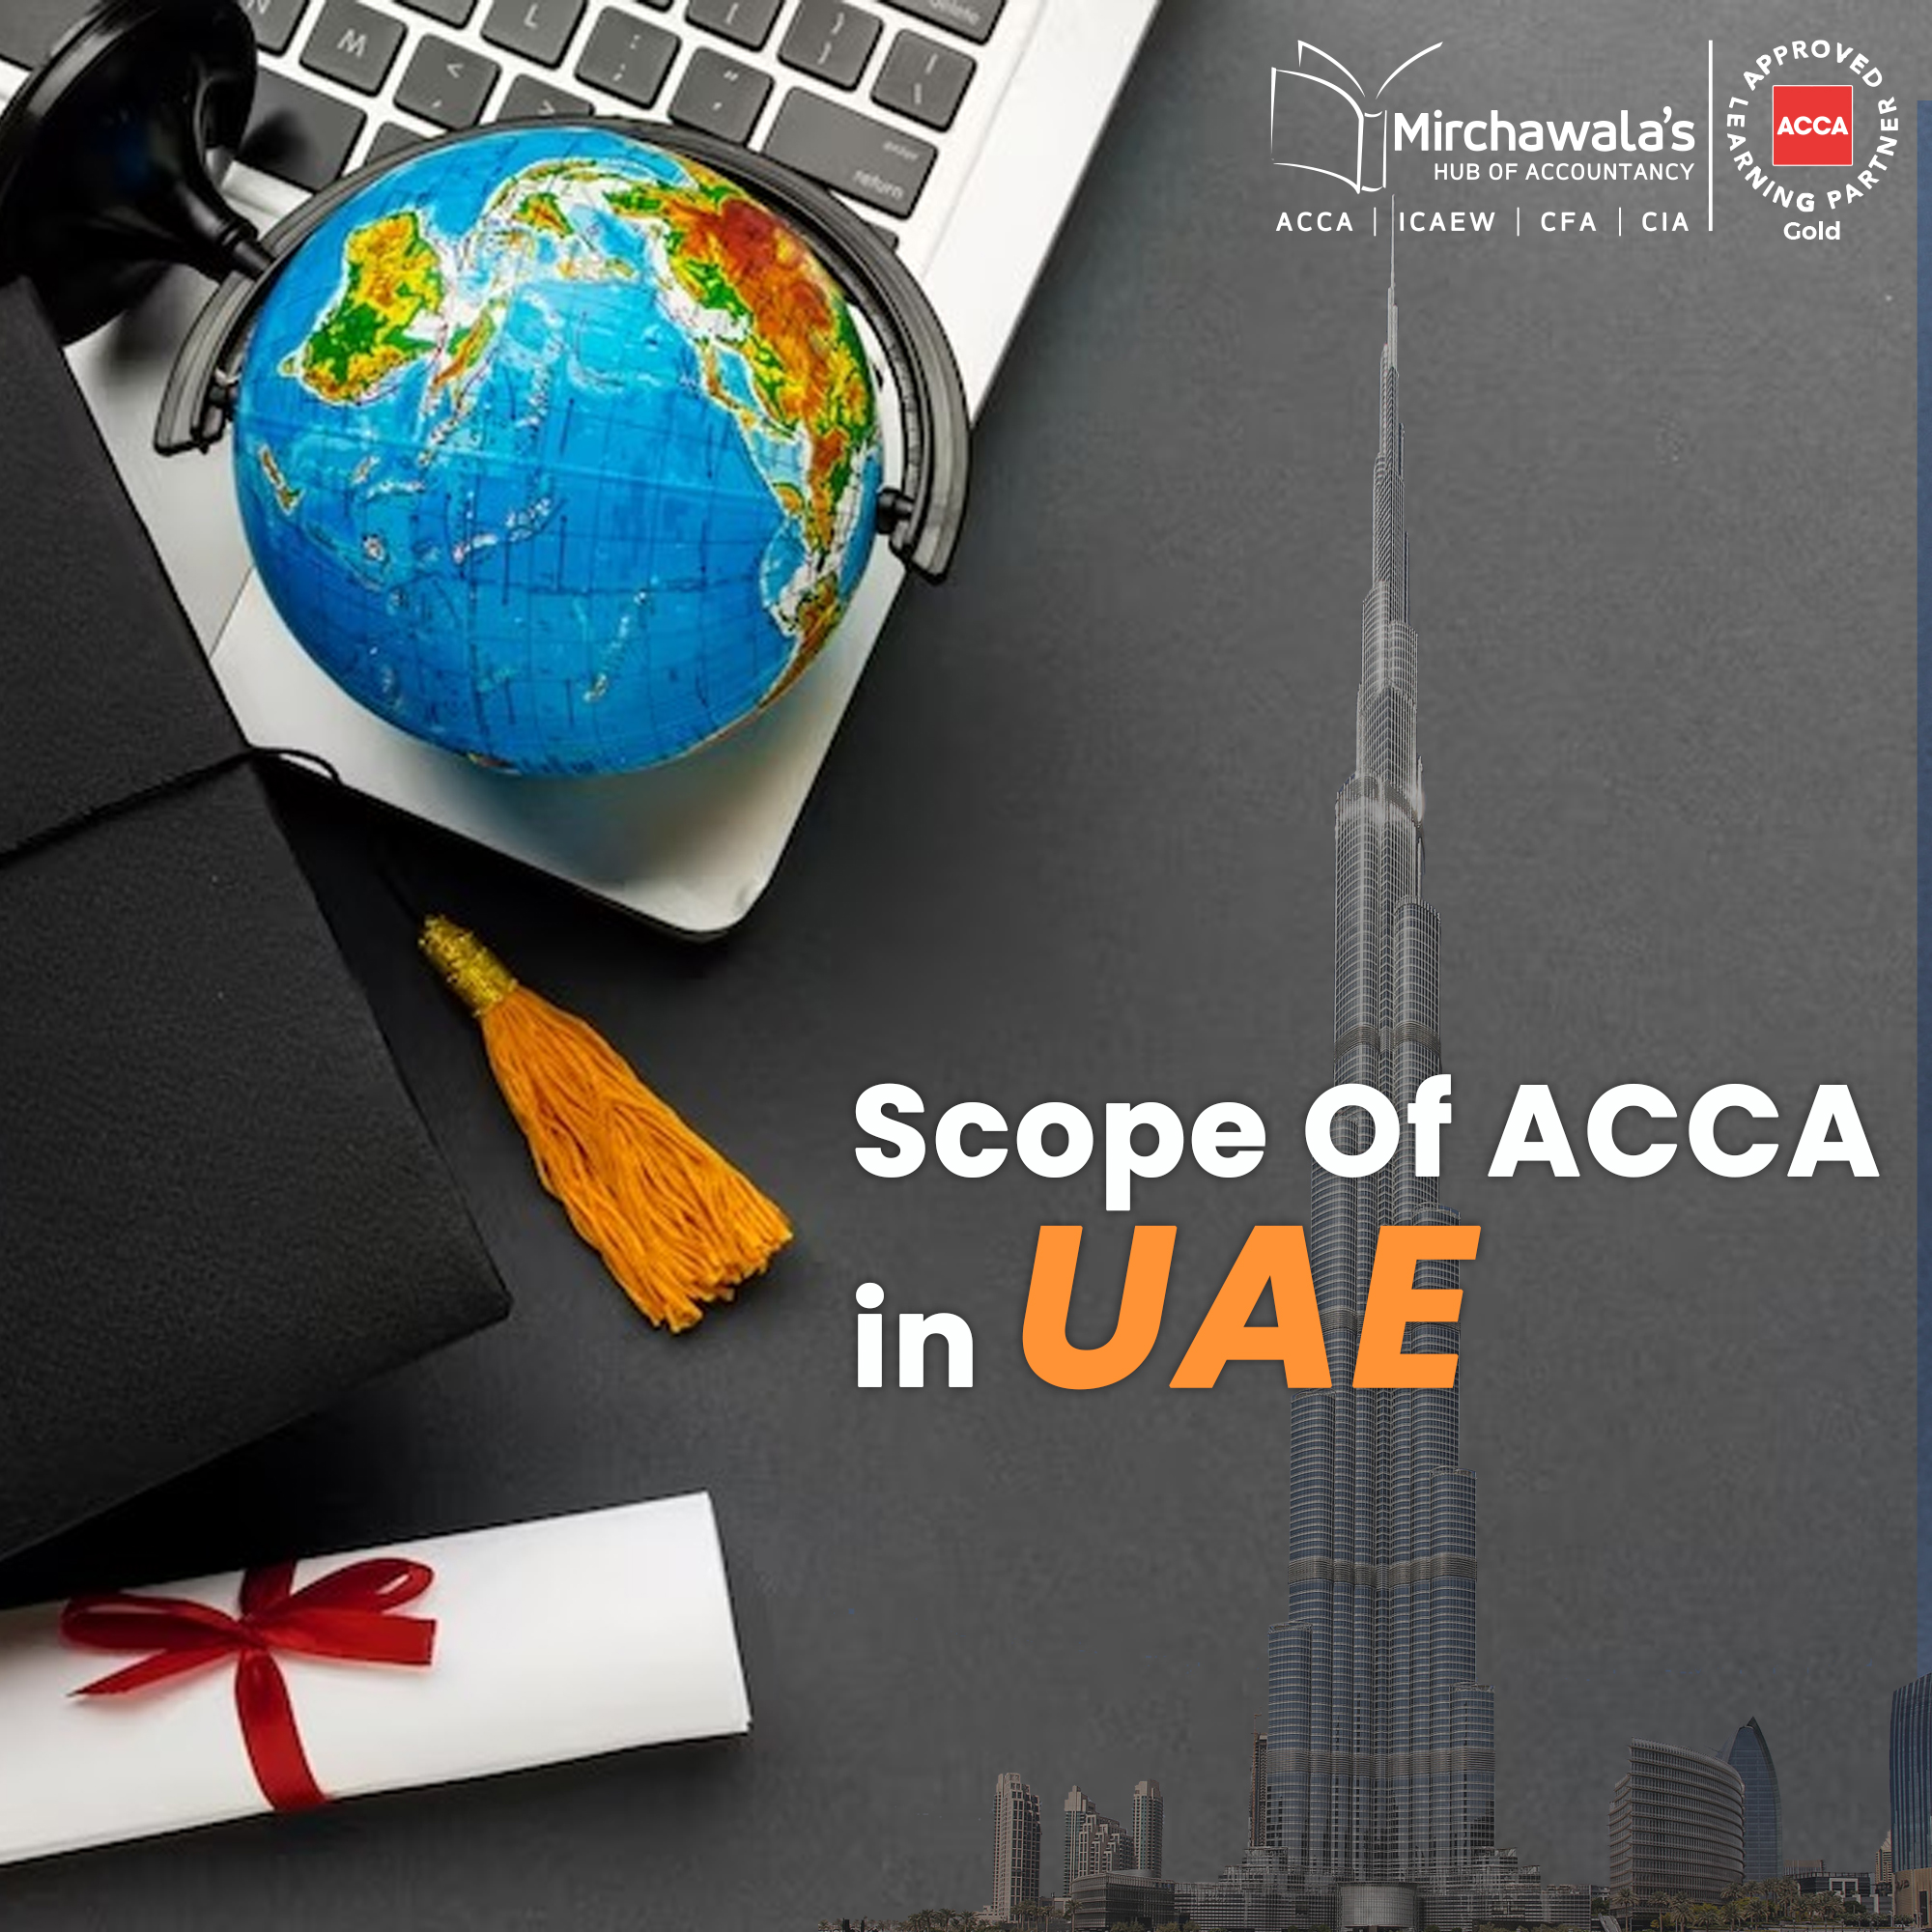 “Scope of ACCA in the UAE- Exploring the Vast Opportunities:”